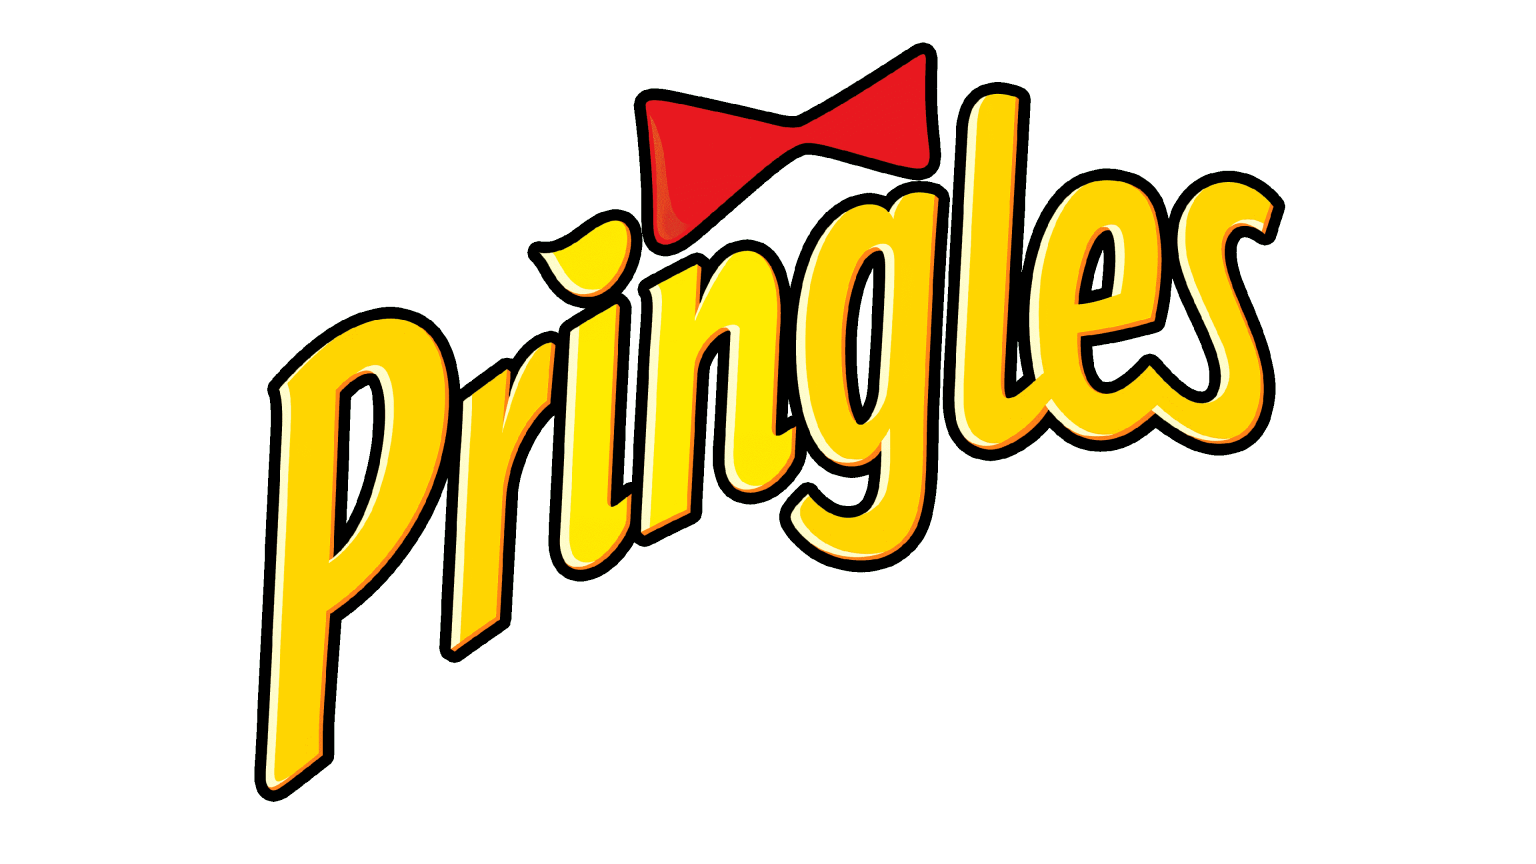 Pringles Logo and sign, new logo meaning and history, PNG, SVG